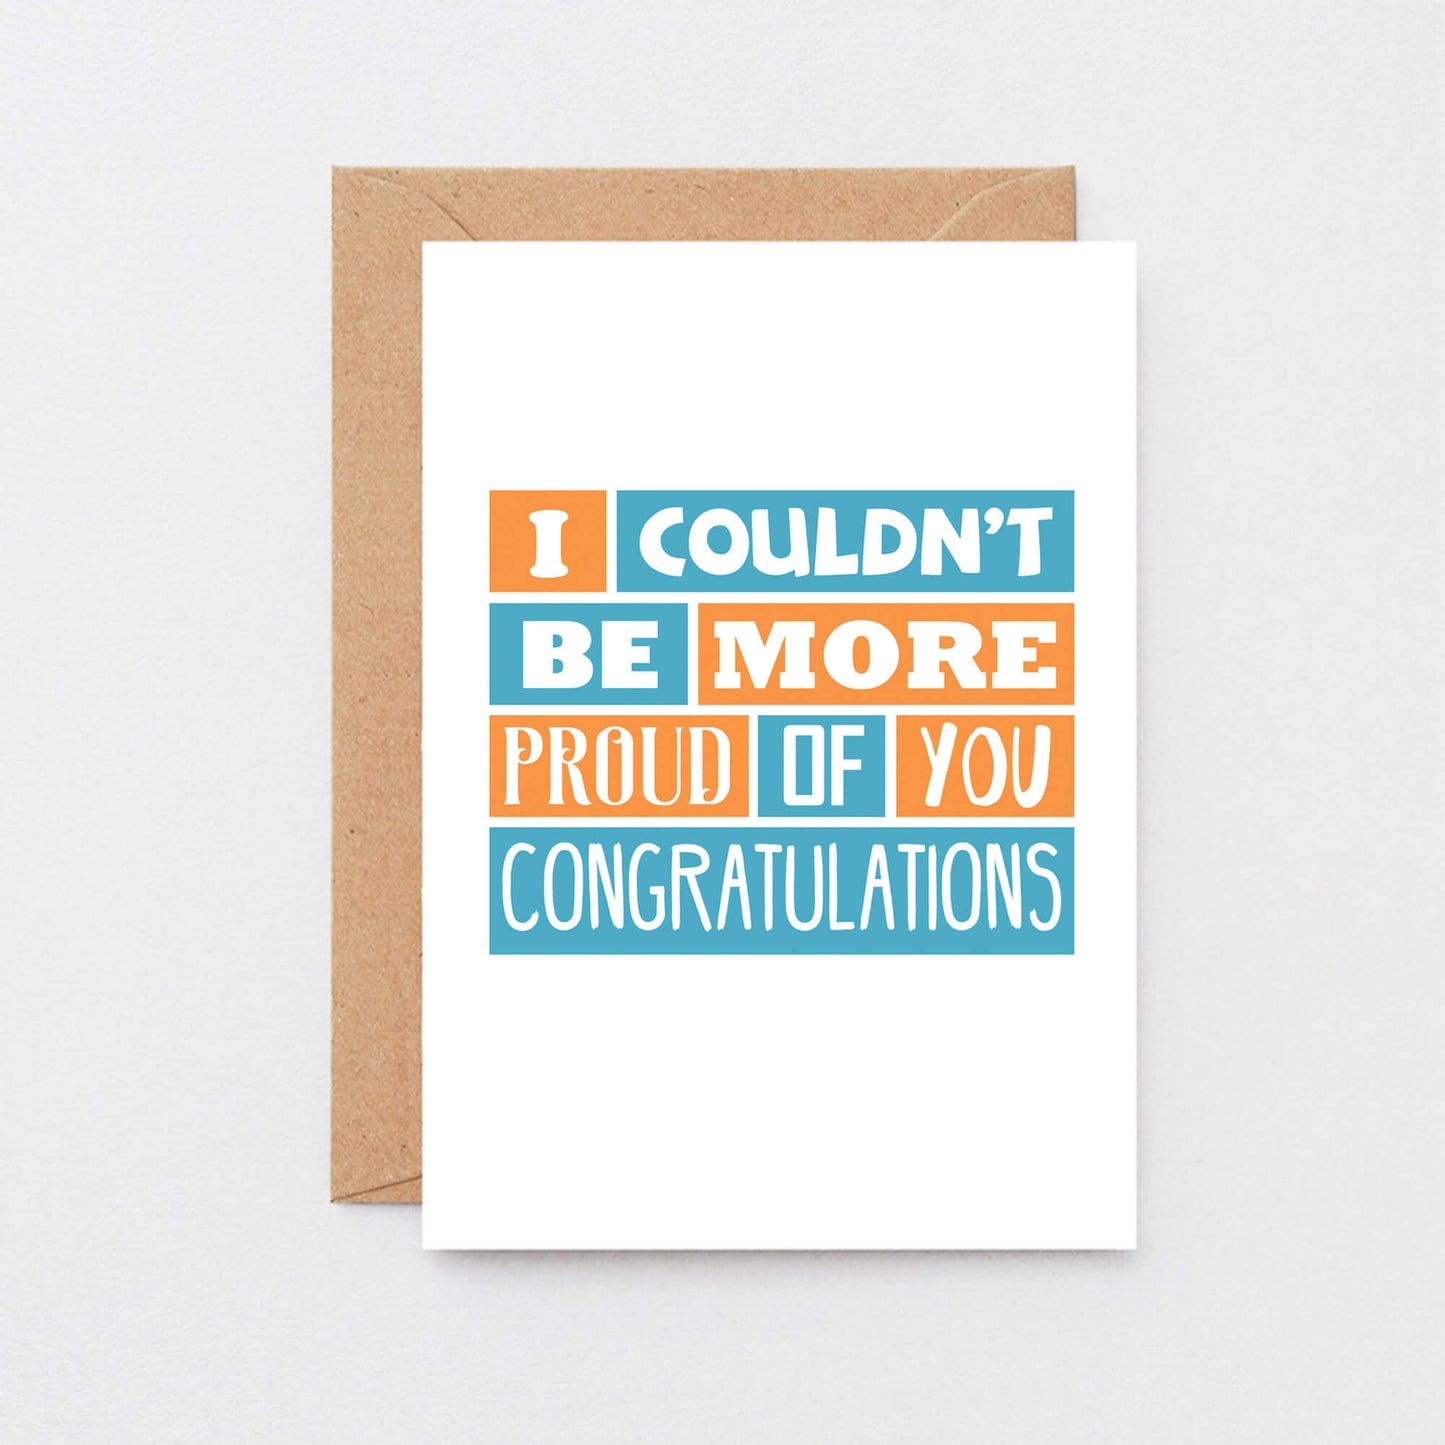 Congratulations Card by SixElevenCreations. Reads I couldn't be more proud of you. Congratulations. Reads SE0173A6